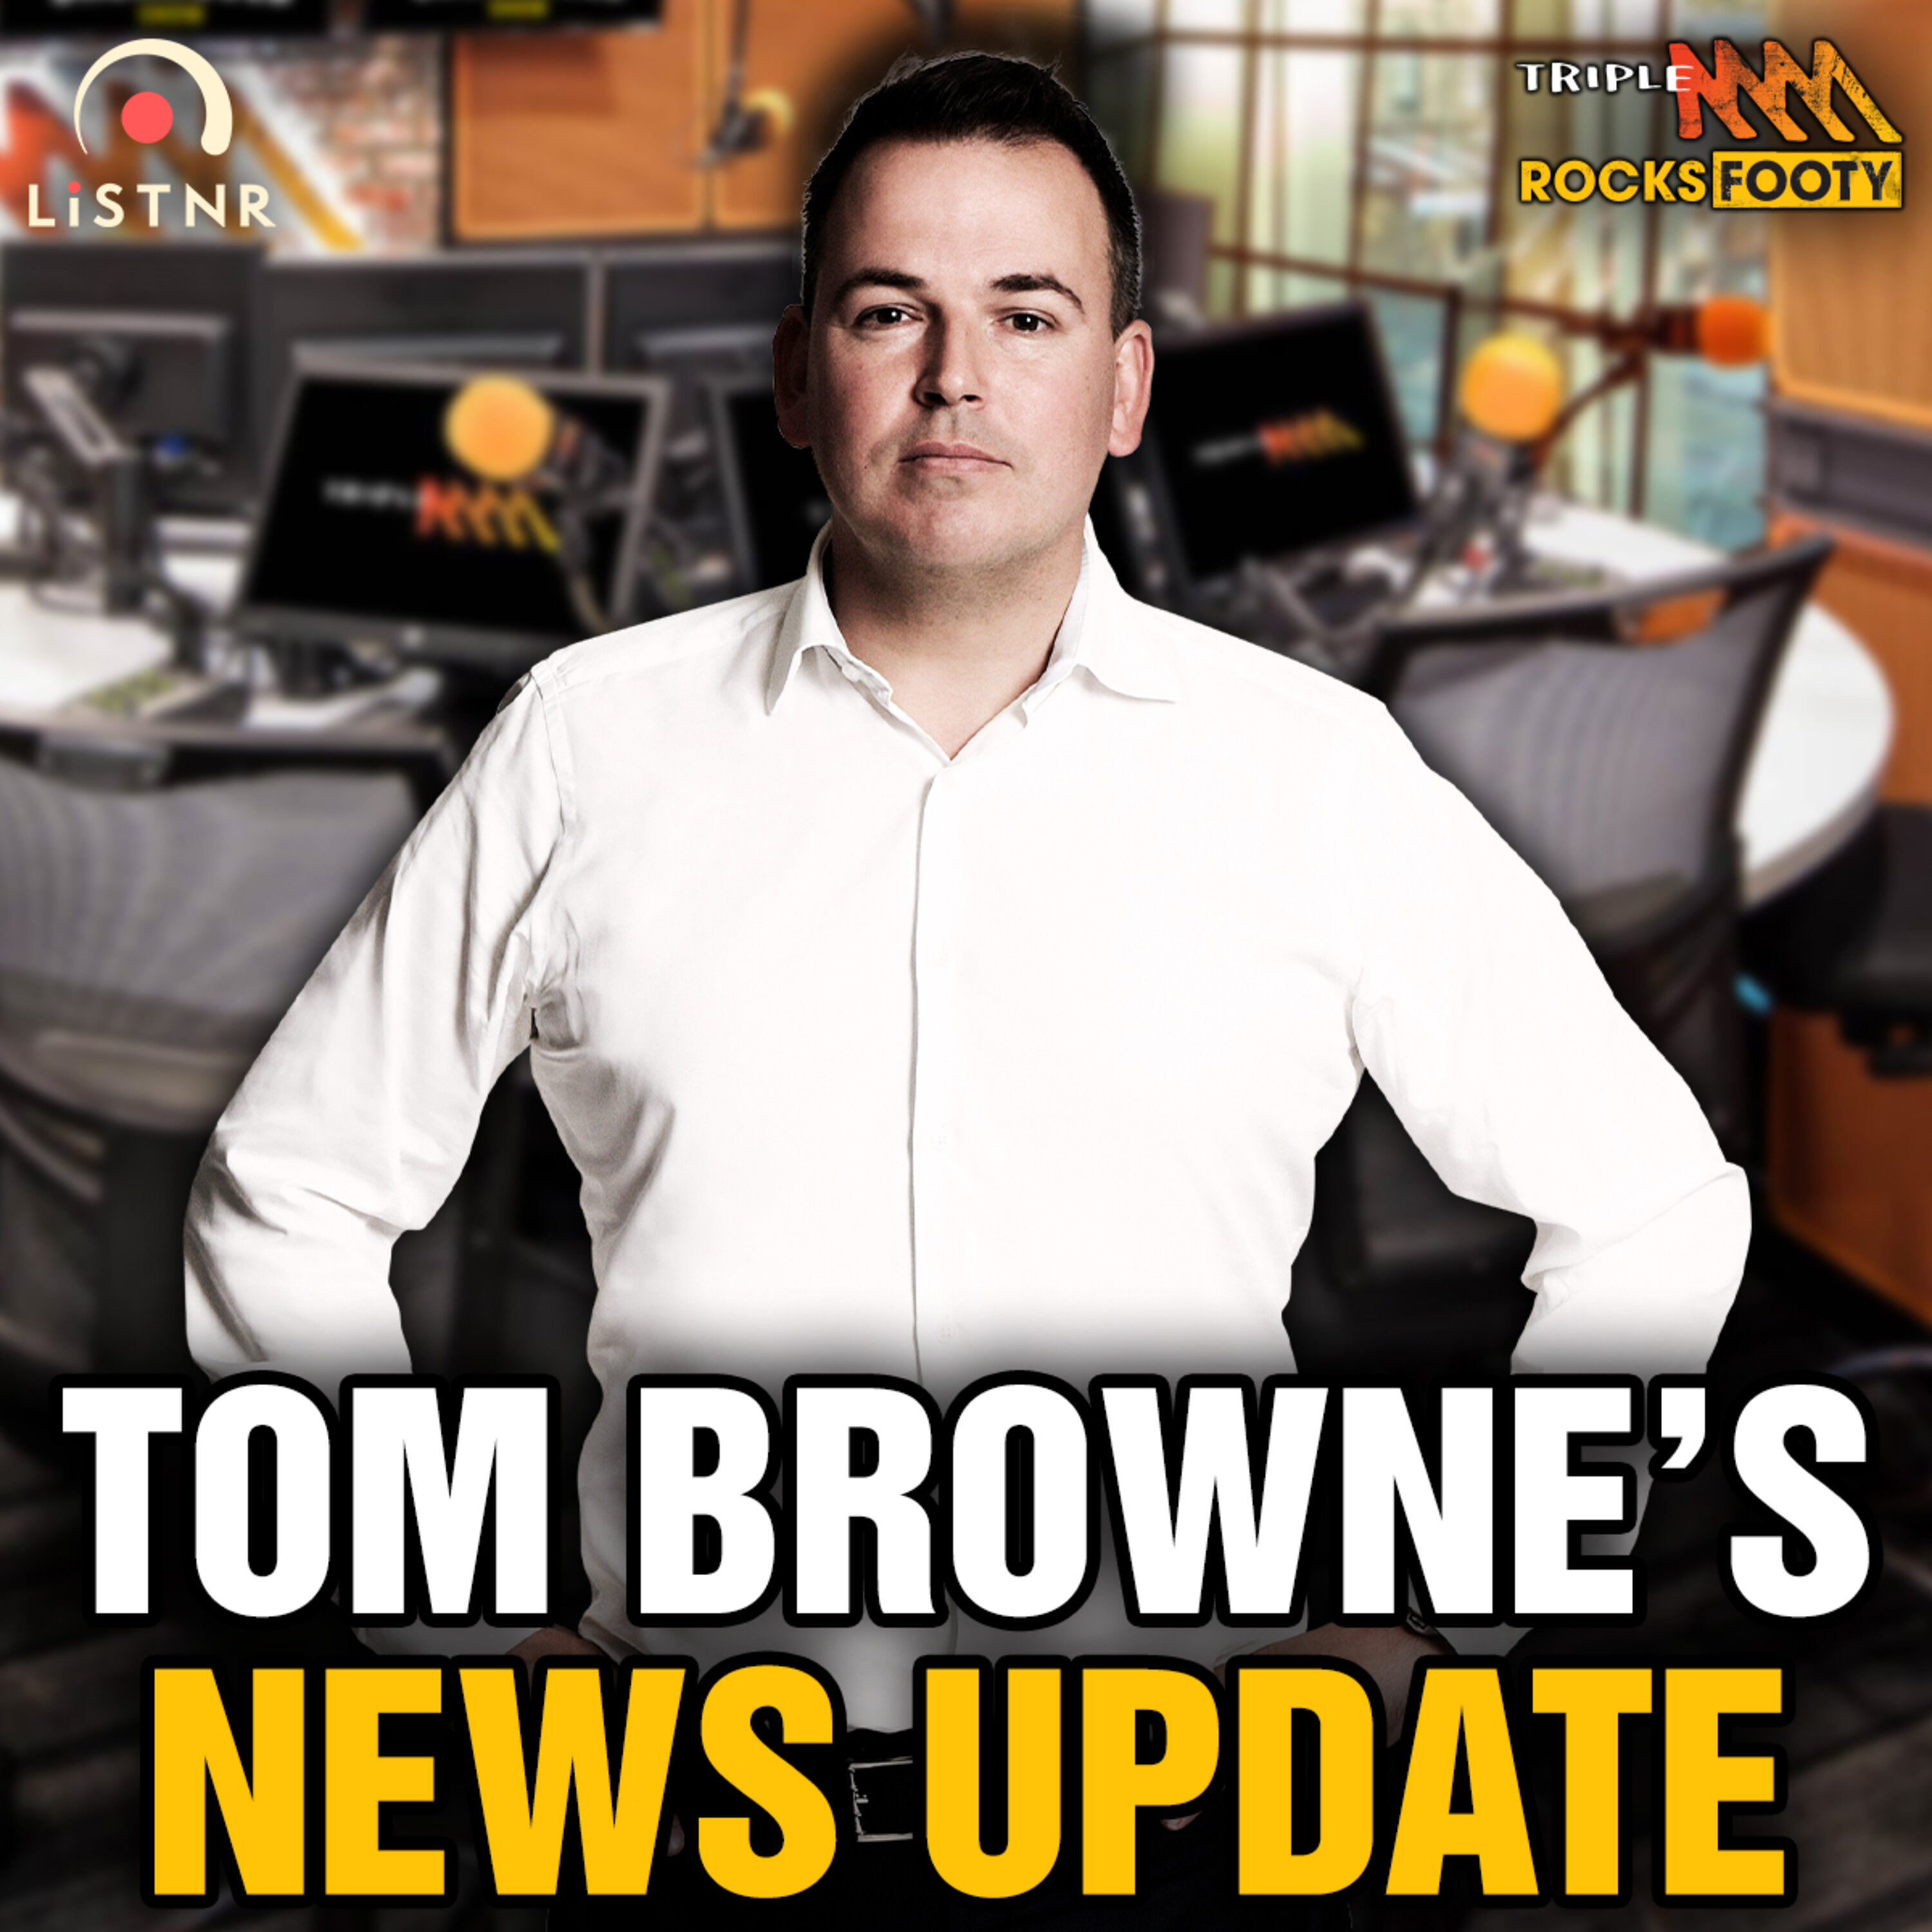 Tom Browne's News | All the fallout from Carlton and West Coast's losses, an update on the Hawthorn investigation, did North make a 77th rotation?